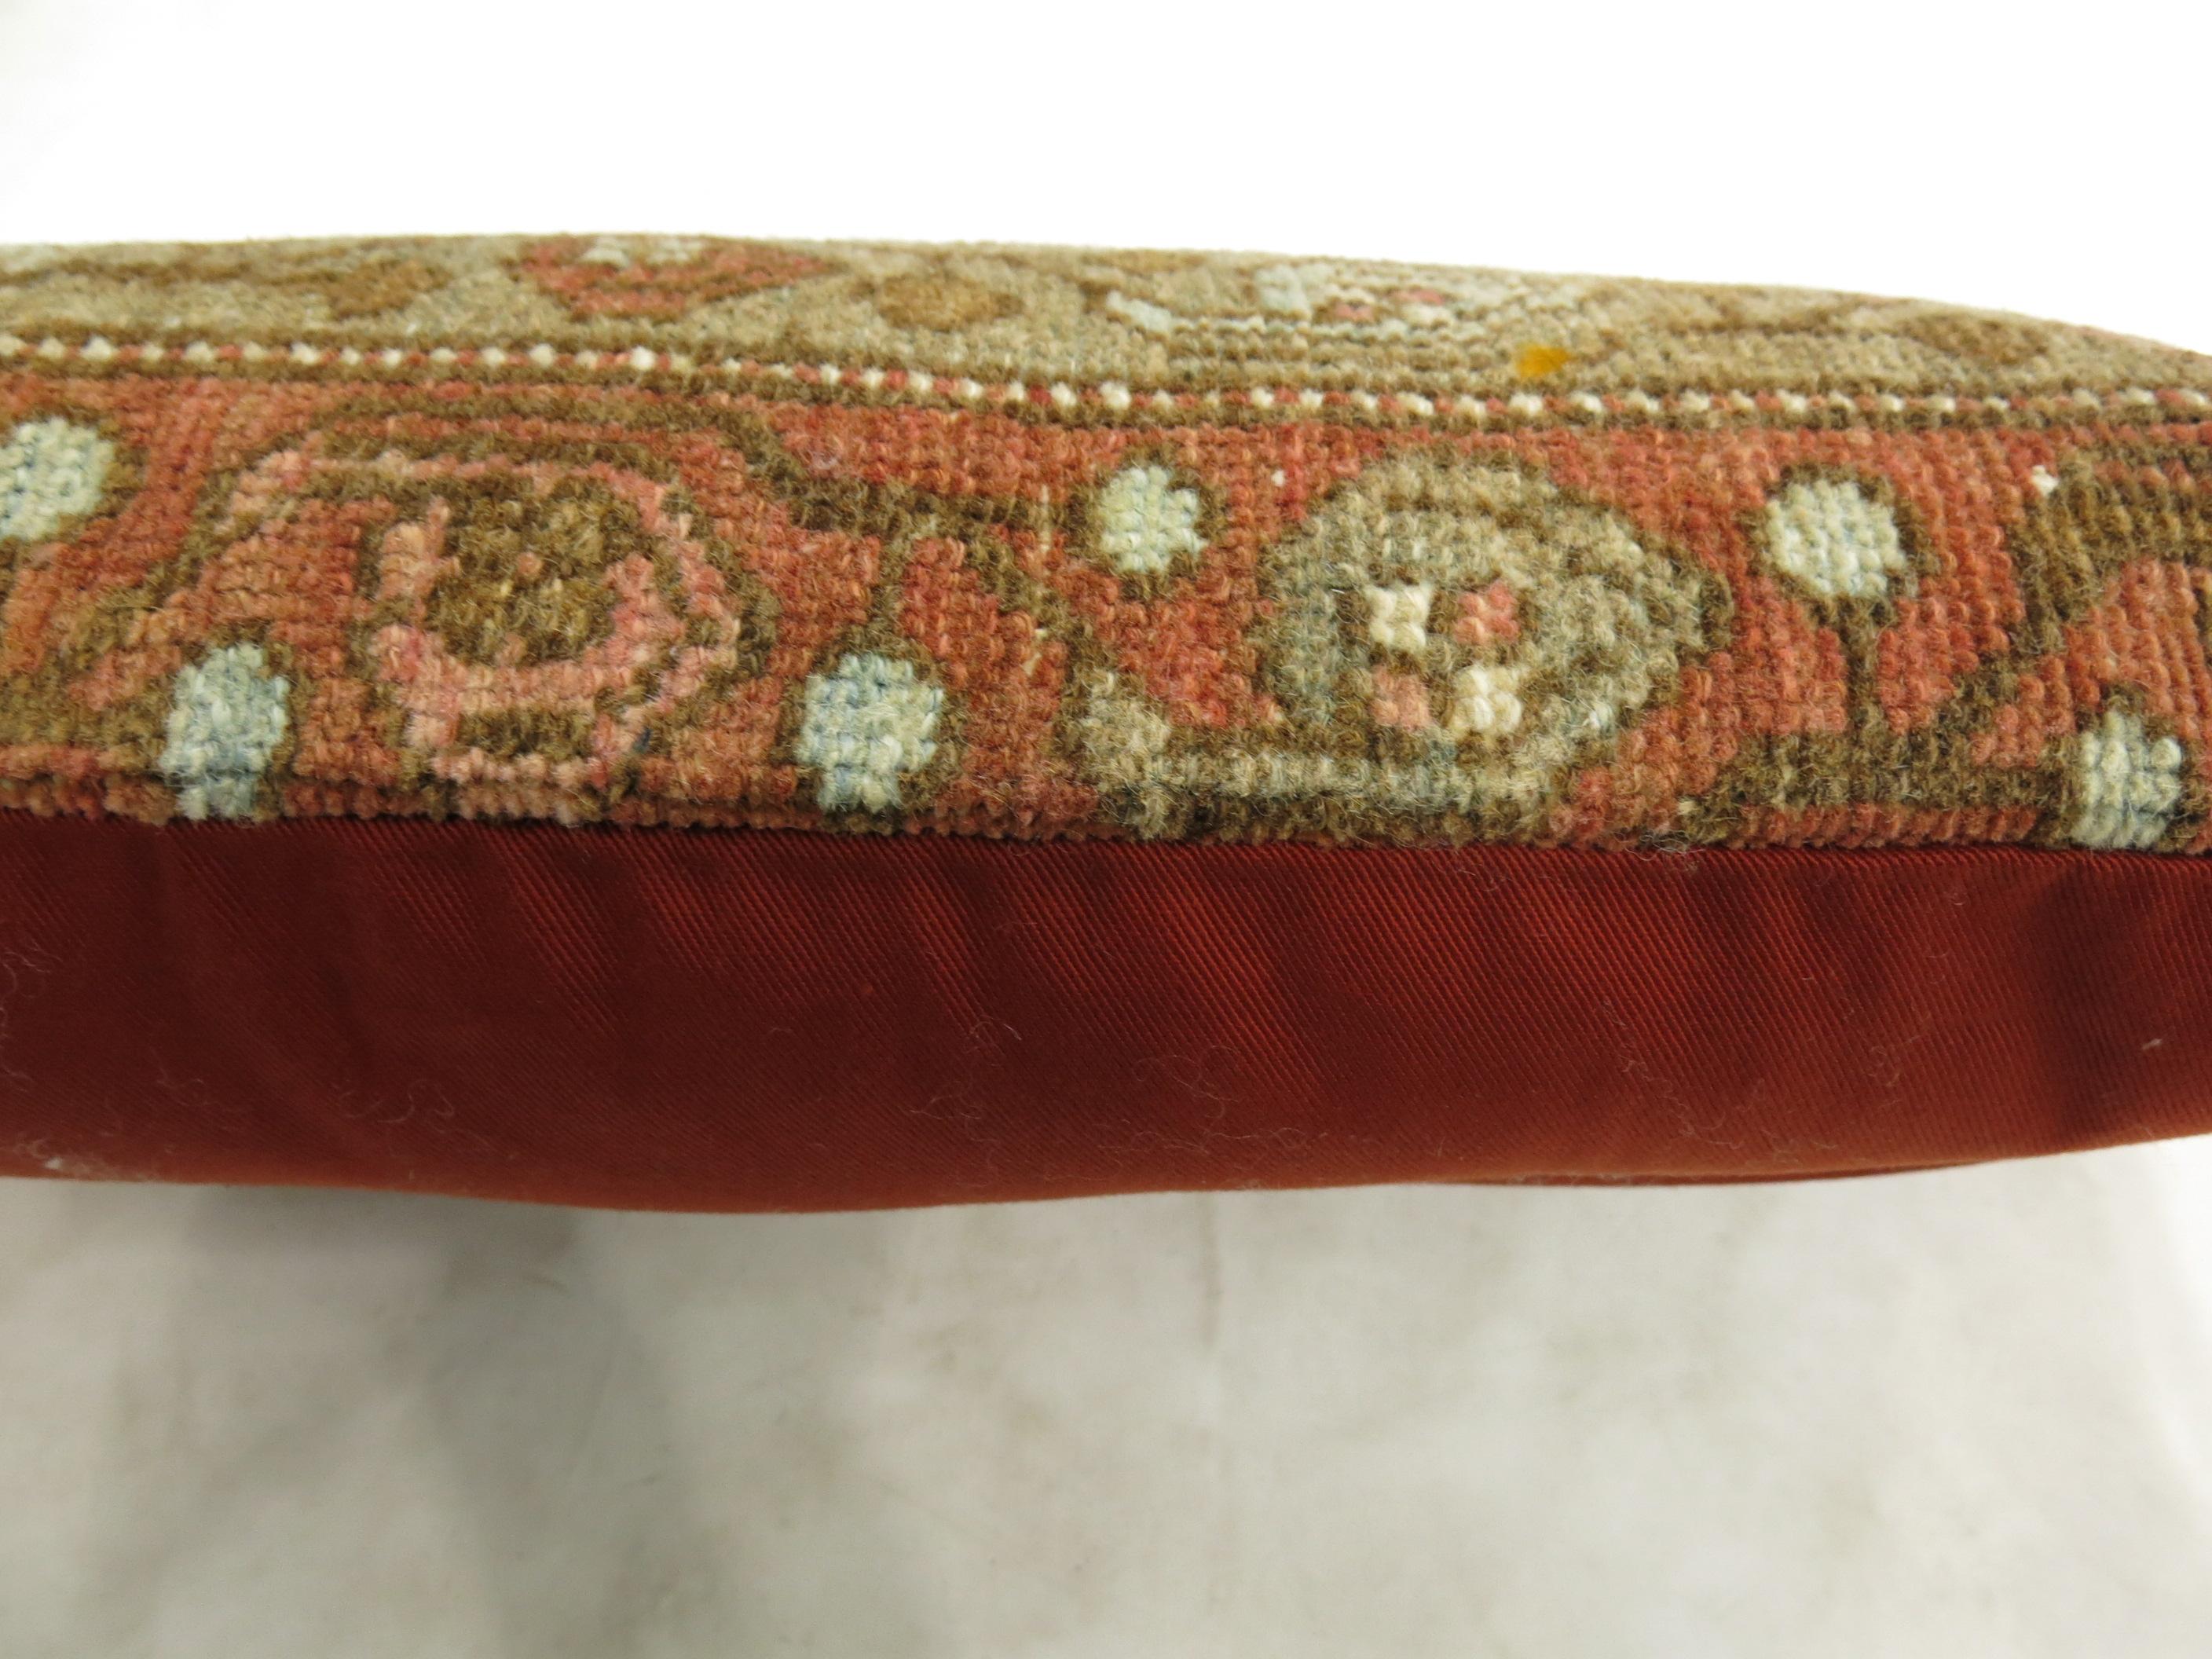 Hand-Knotted Persian Bolster Rug Pillow in Caramel Brown Terracotta Accents